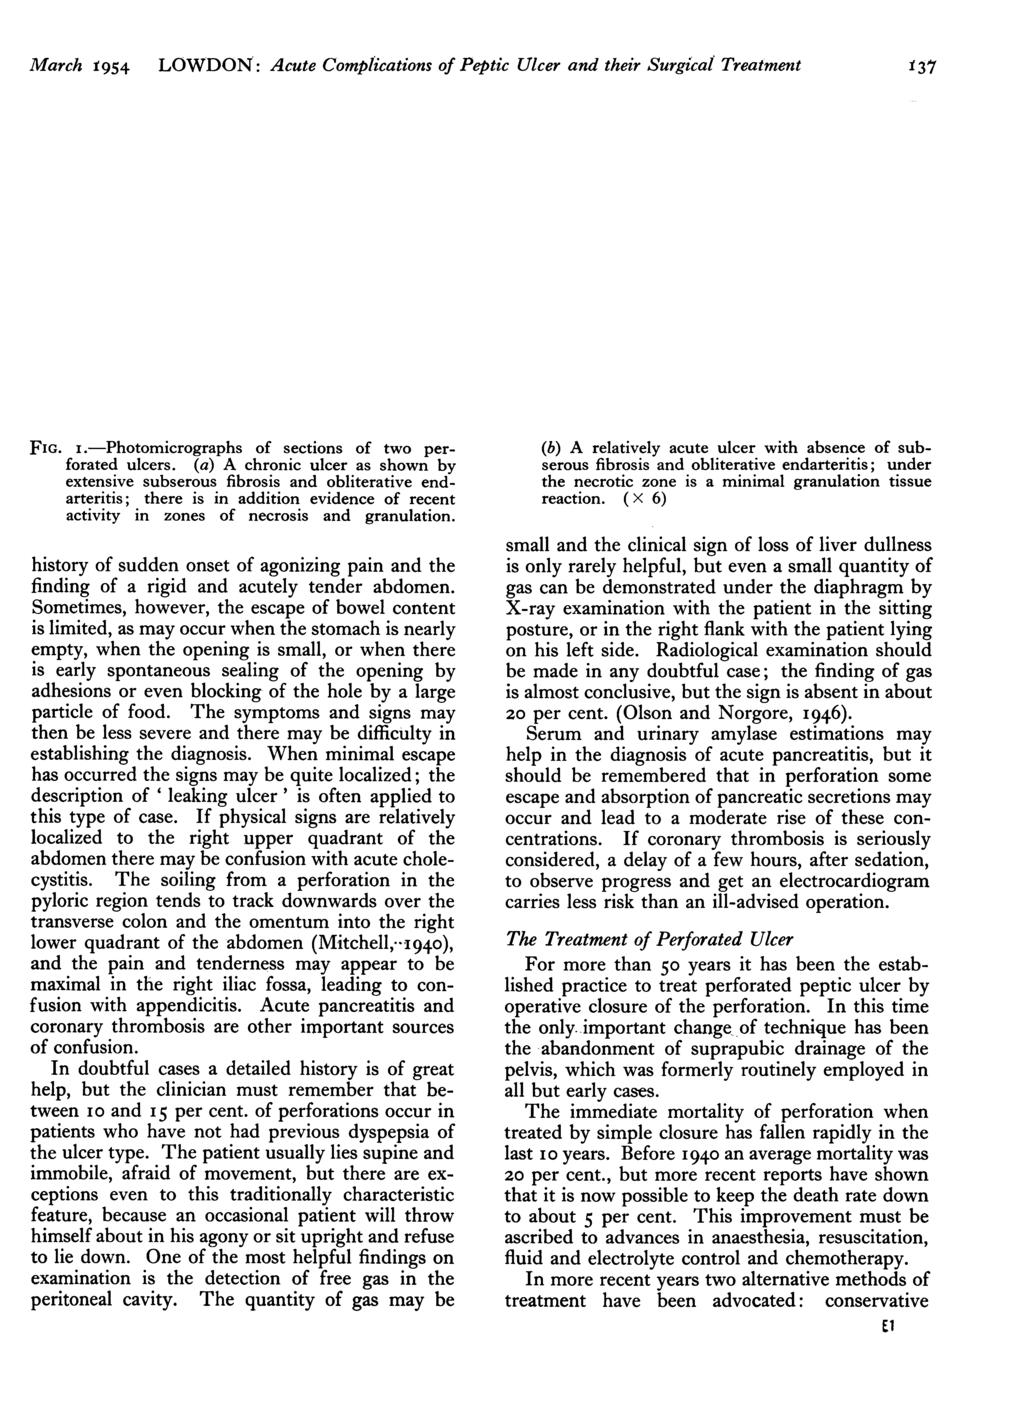 March 1954 LOWDON: Acute Complications of Peptic Ulcer and their Surgical Treatment 3 FIG. i.-photomicrographs of sections of two perforated ulcers.